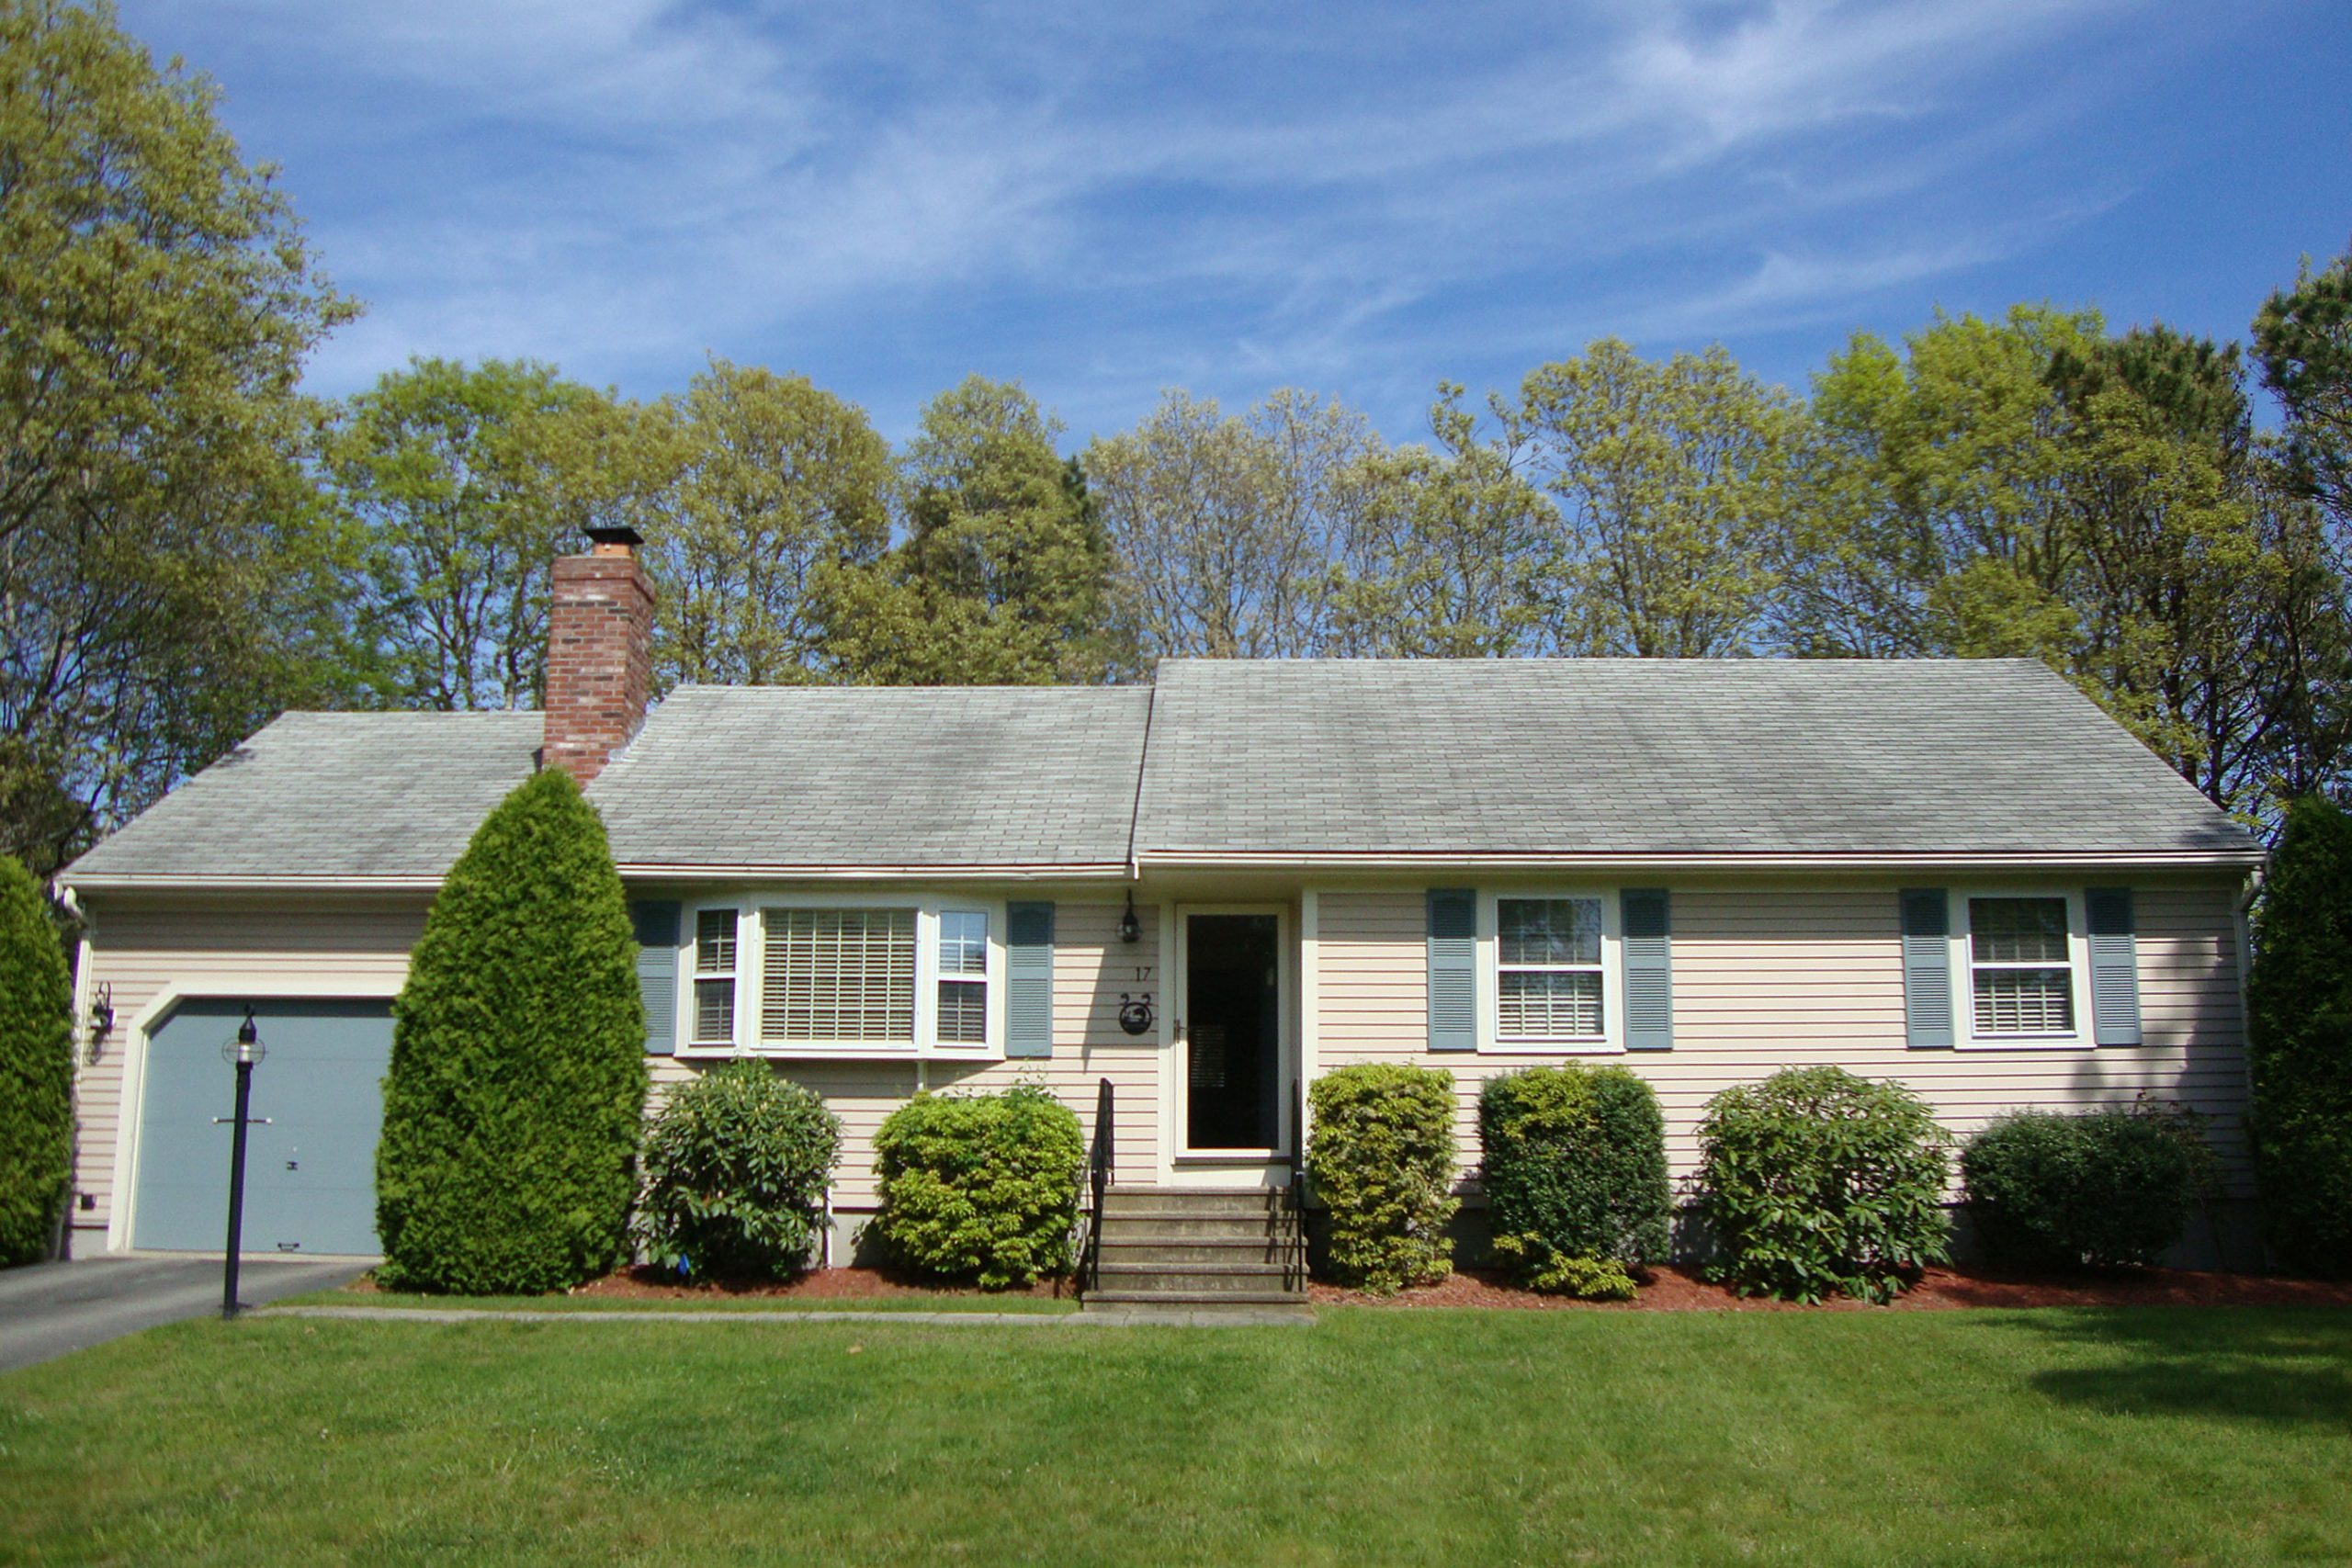 West Yarmouth, MA Painting Professionals